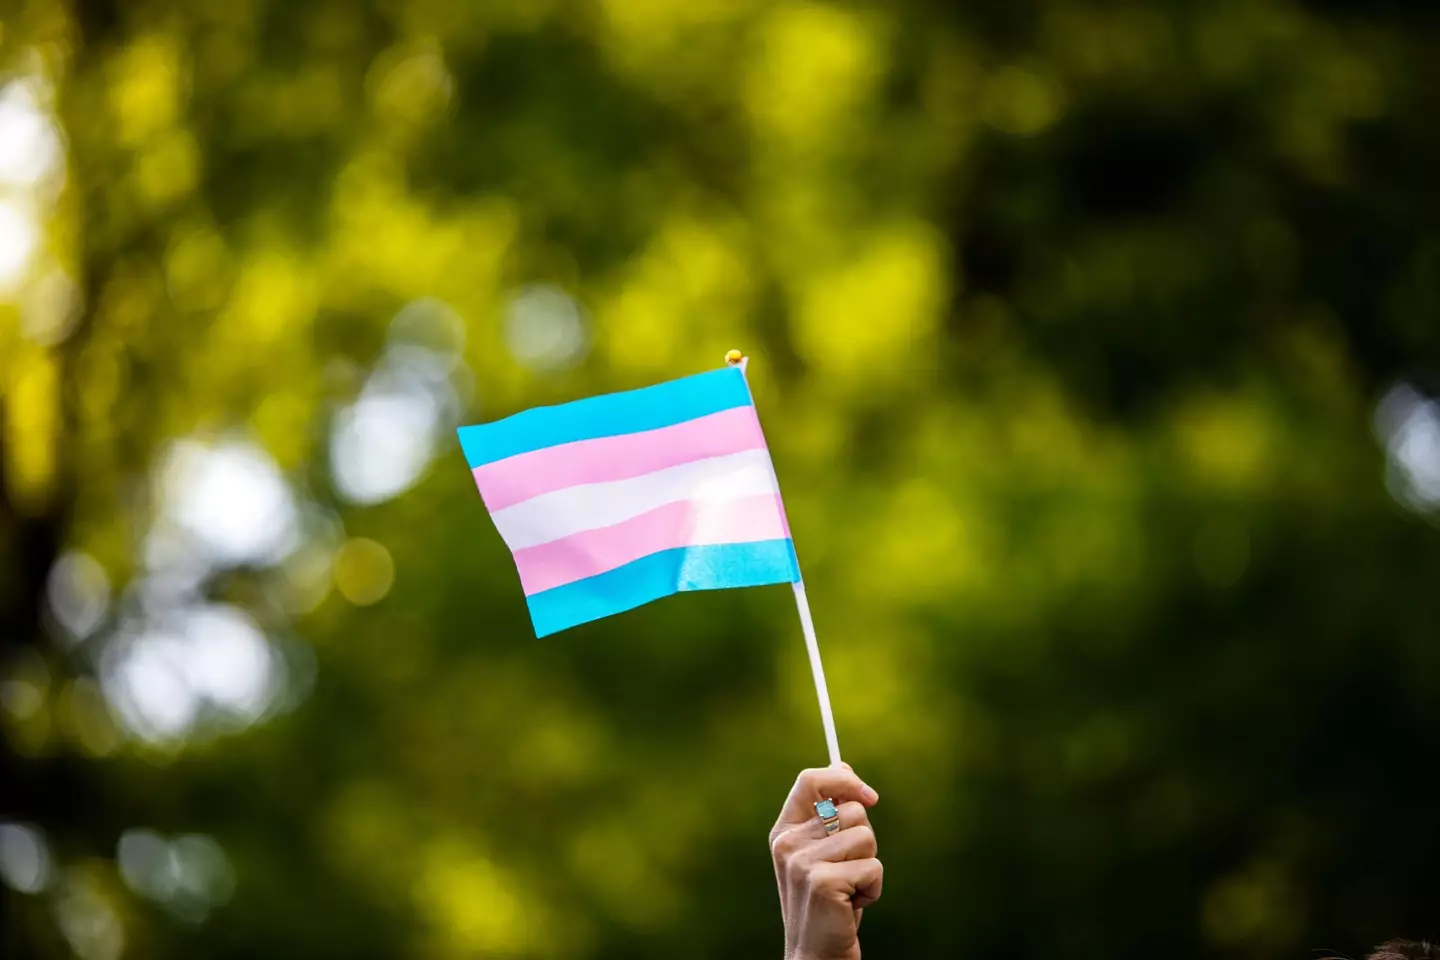 The church said it supports trans people 'of all ages'. Credit Alamy / REUTERS